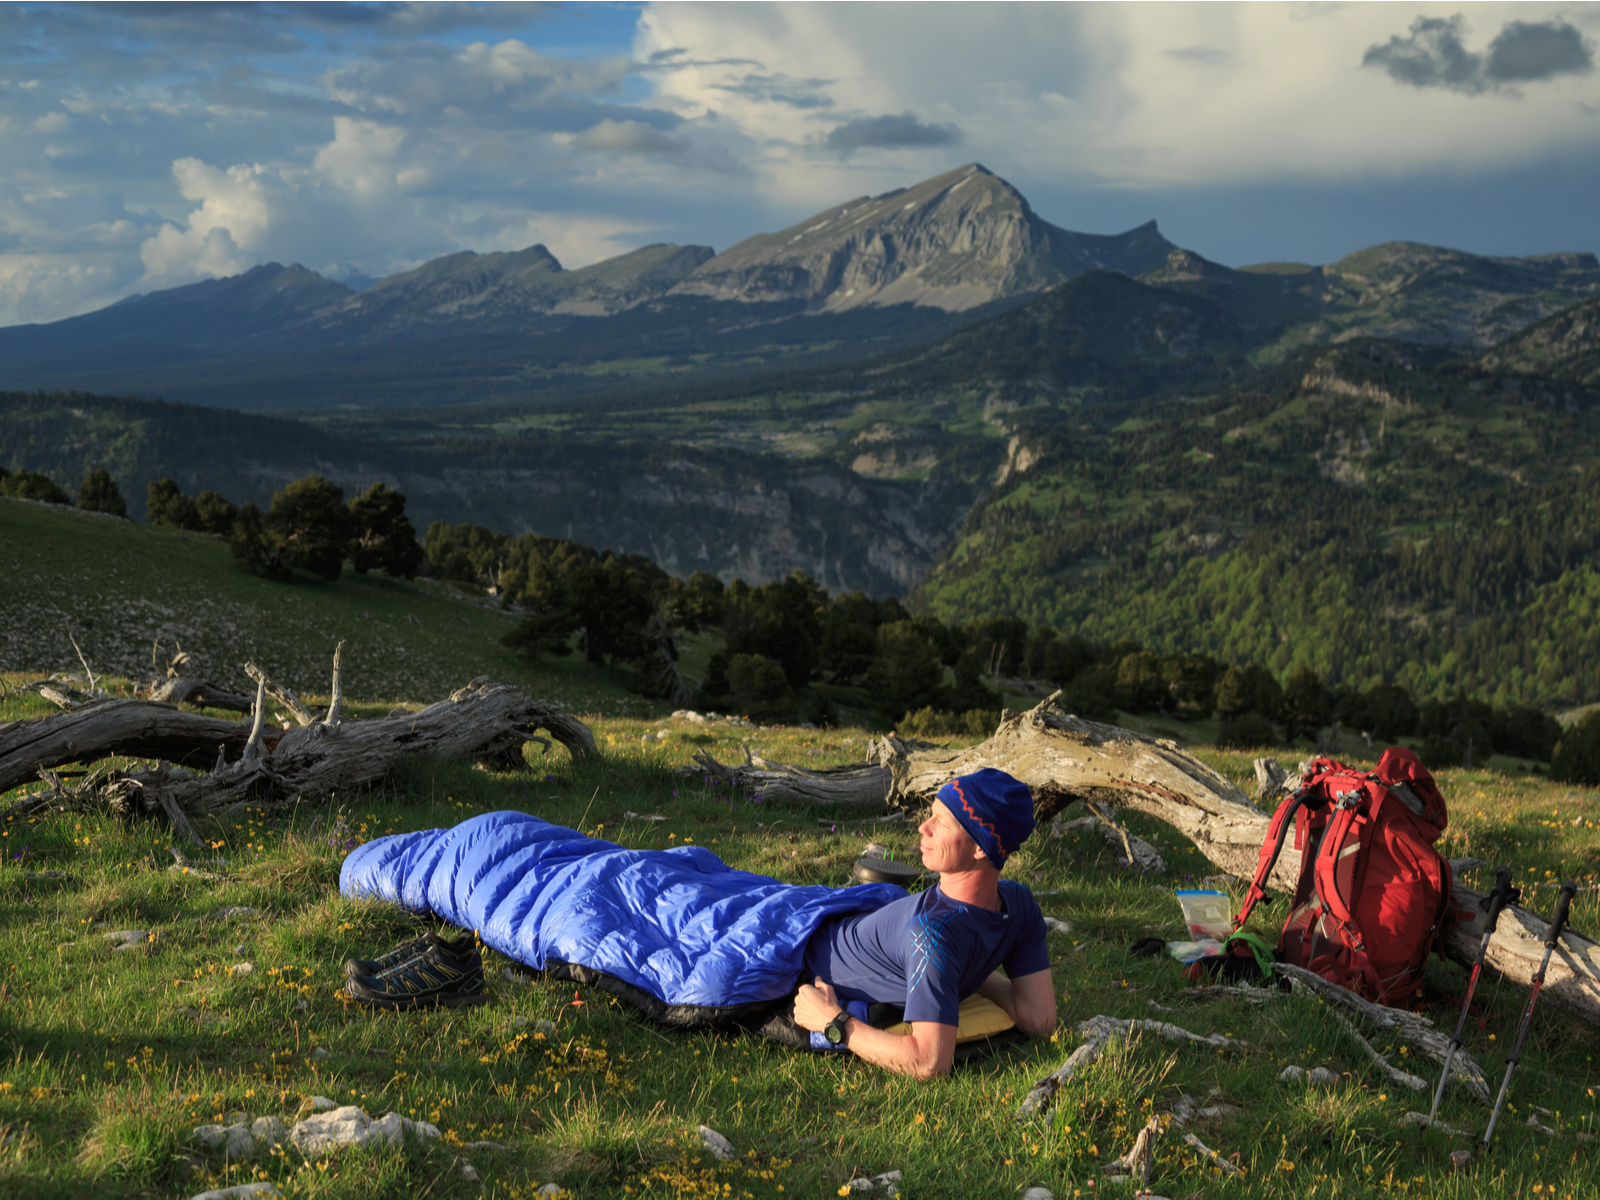 Hiker preparing for a hike while using his backpack sleeping bag on the side of a hill